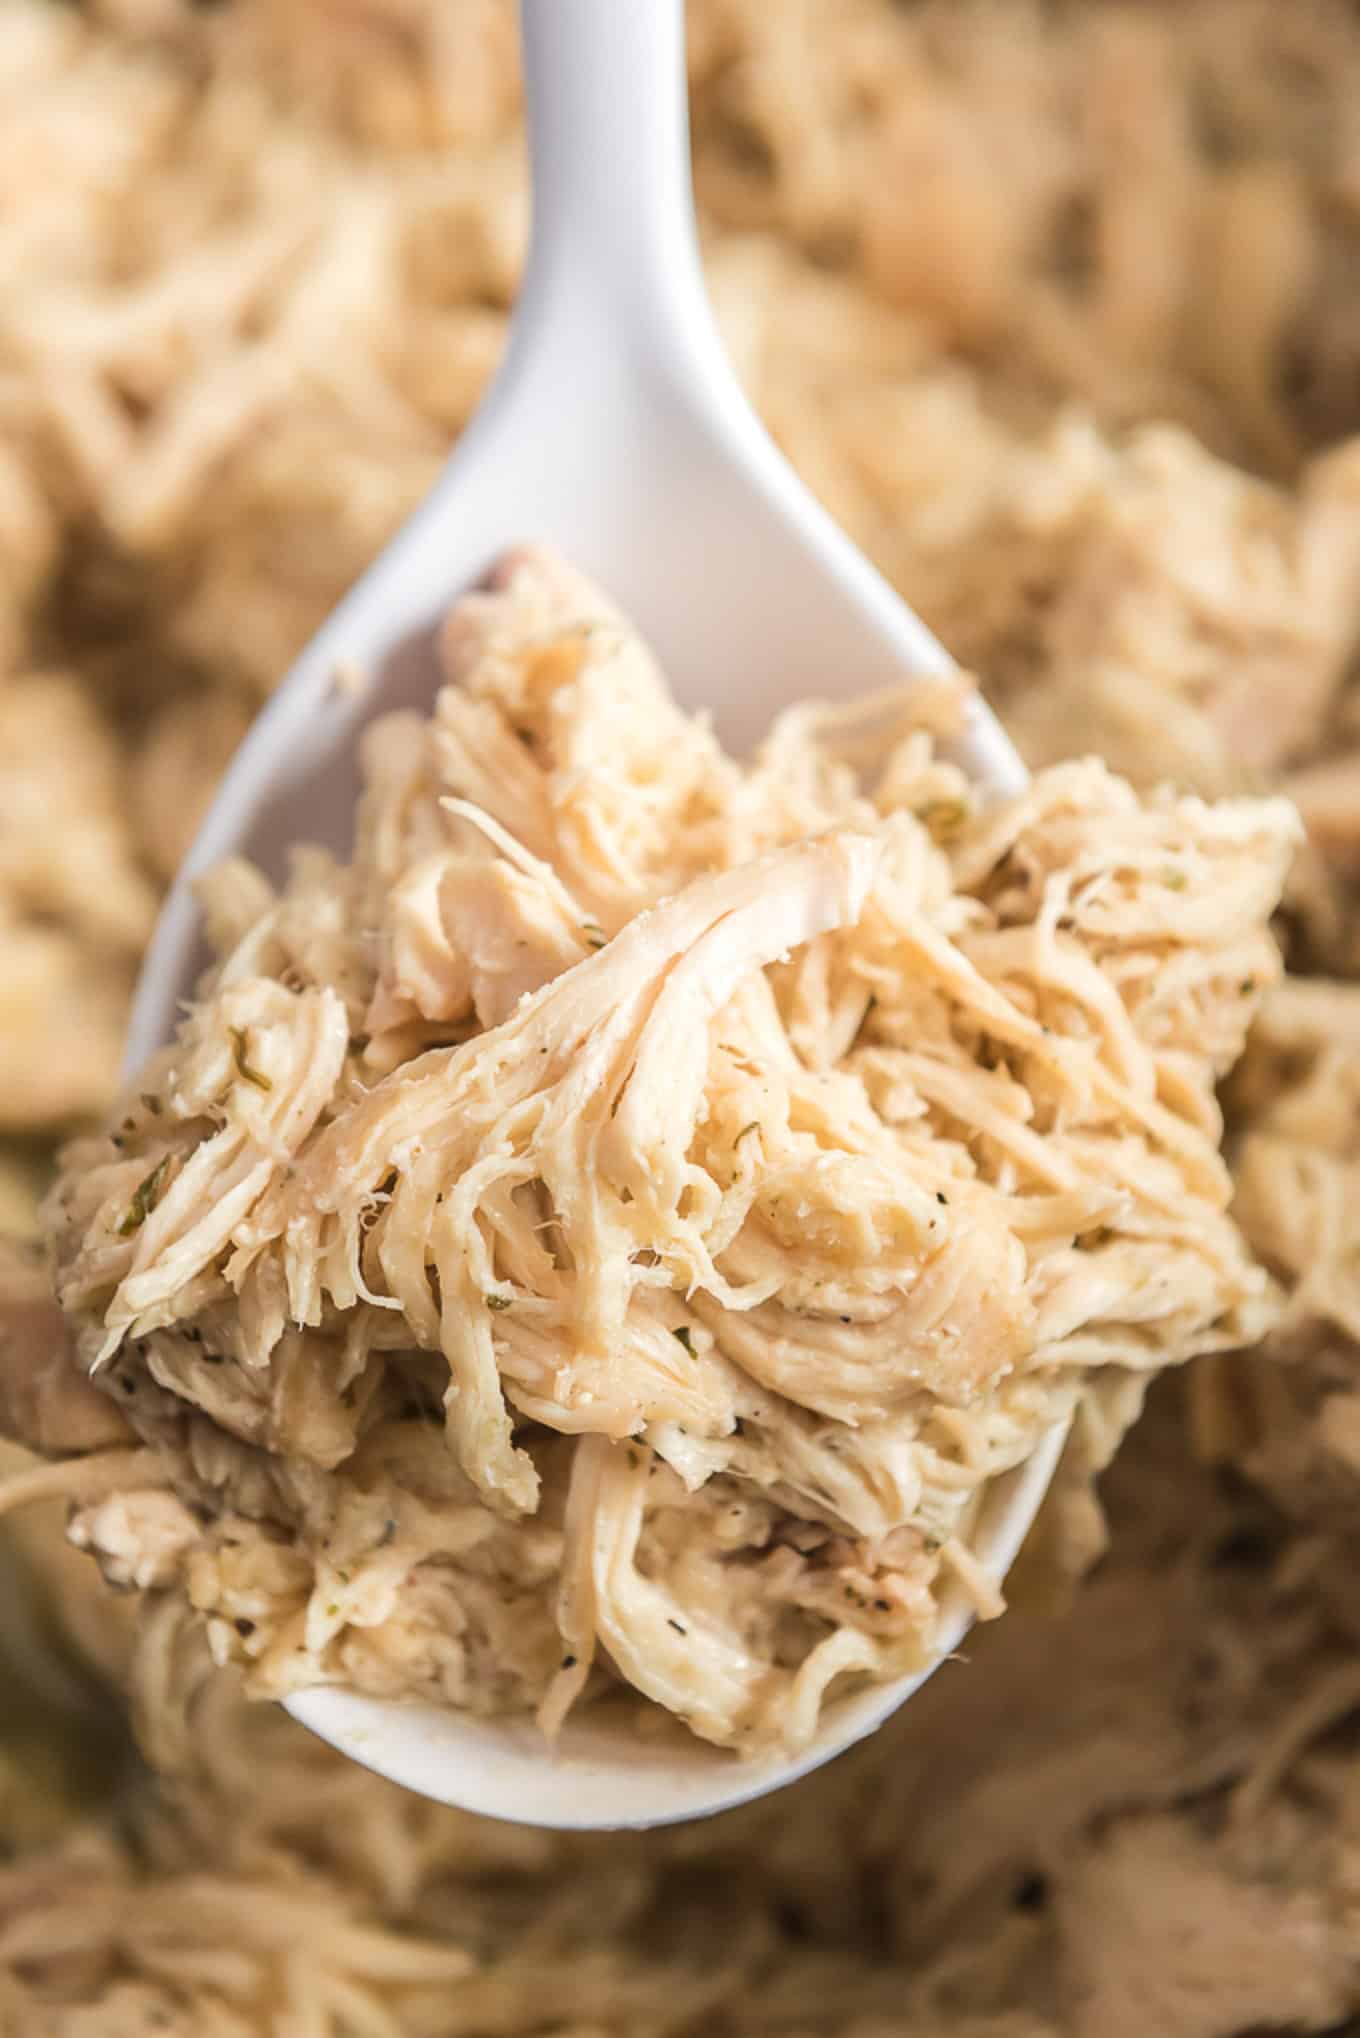 A spoonful of shredded chicken up over a bowl.